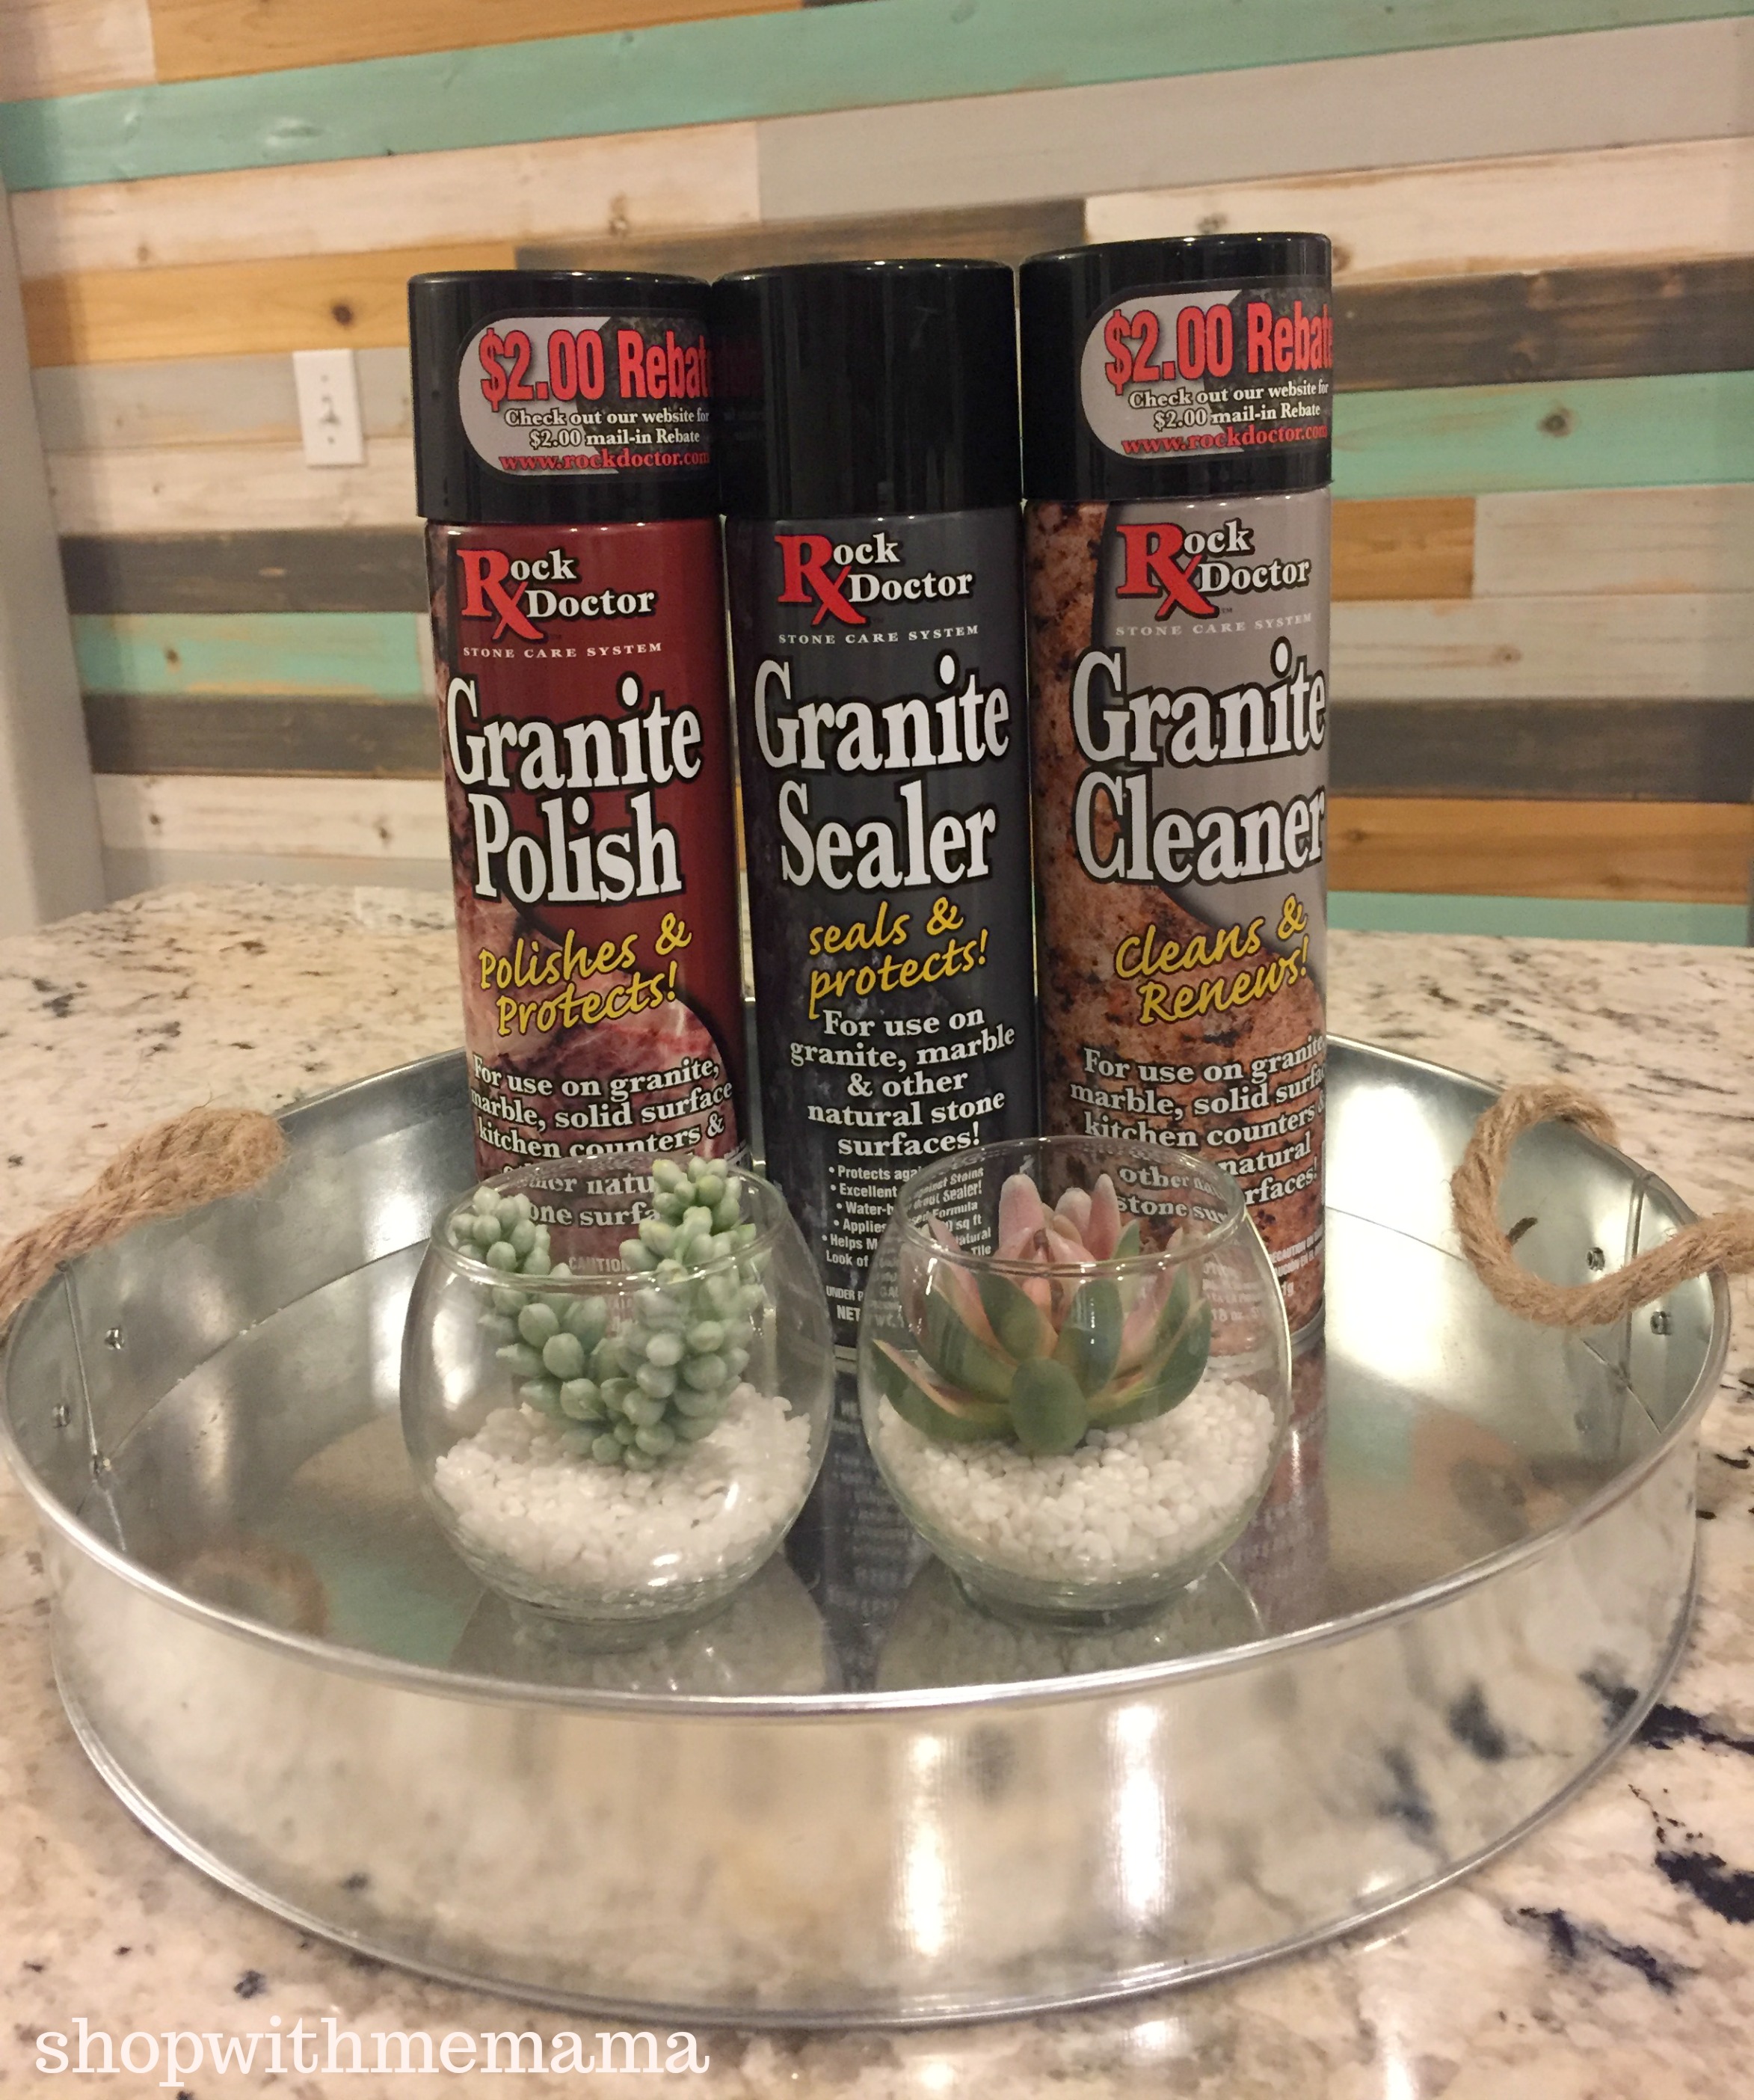 Rock Doctor Cleaner Products For Granite And Stainless Steel